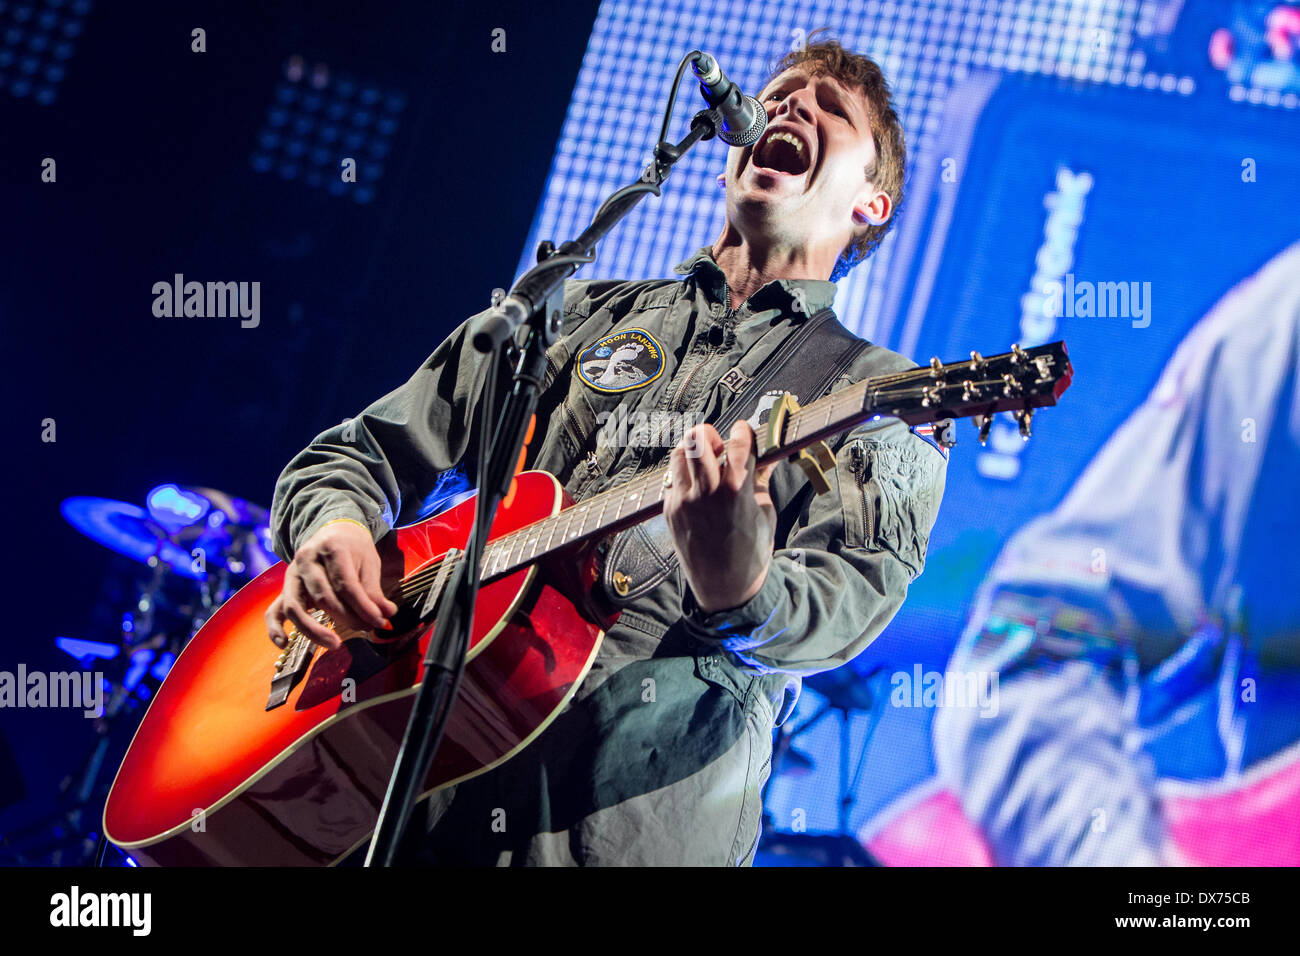 Assago Milan Italy. 18th March 2014. The English singer songwriter JAMES BLUNT performs live at the Mediolanum Forum during the 'Moon Landing Tour Memories 2014' Credit:  Rodolfo Sassano/Alamy Live News Stock Photo